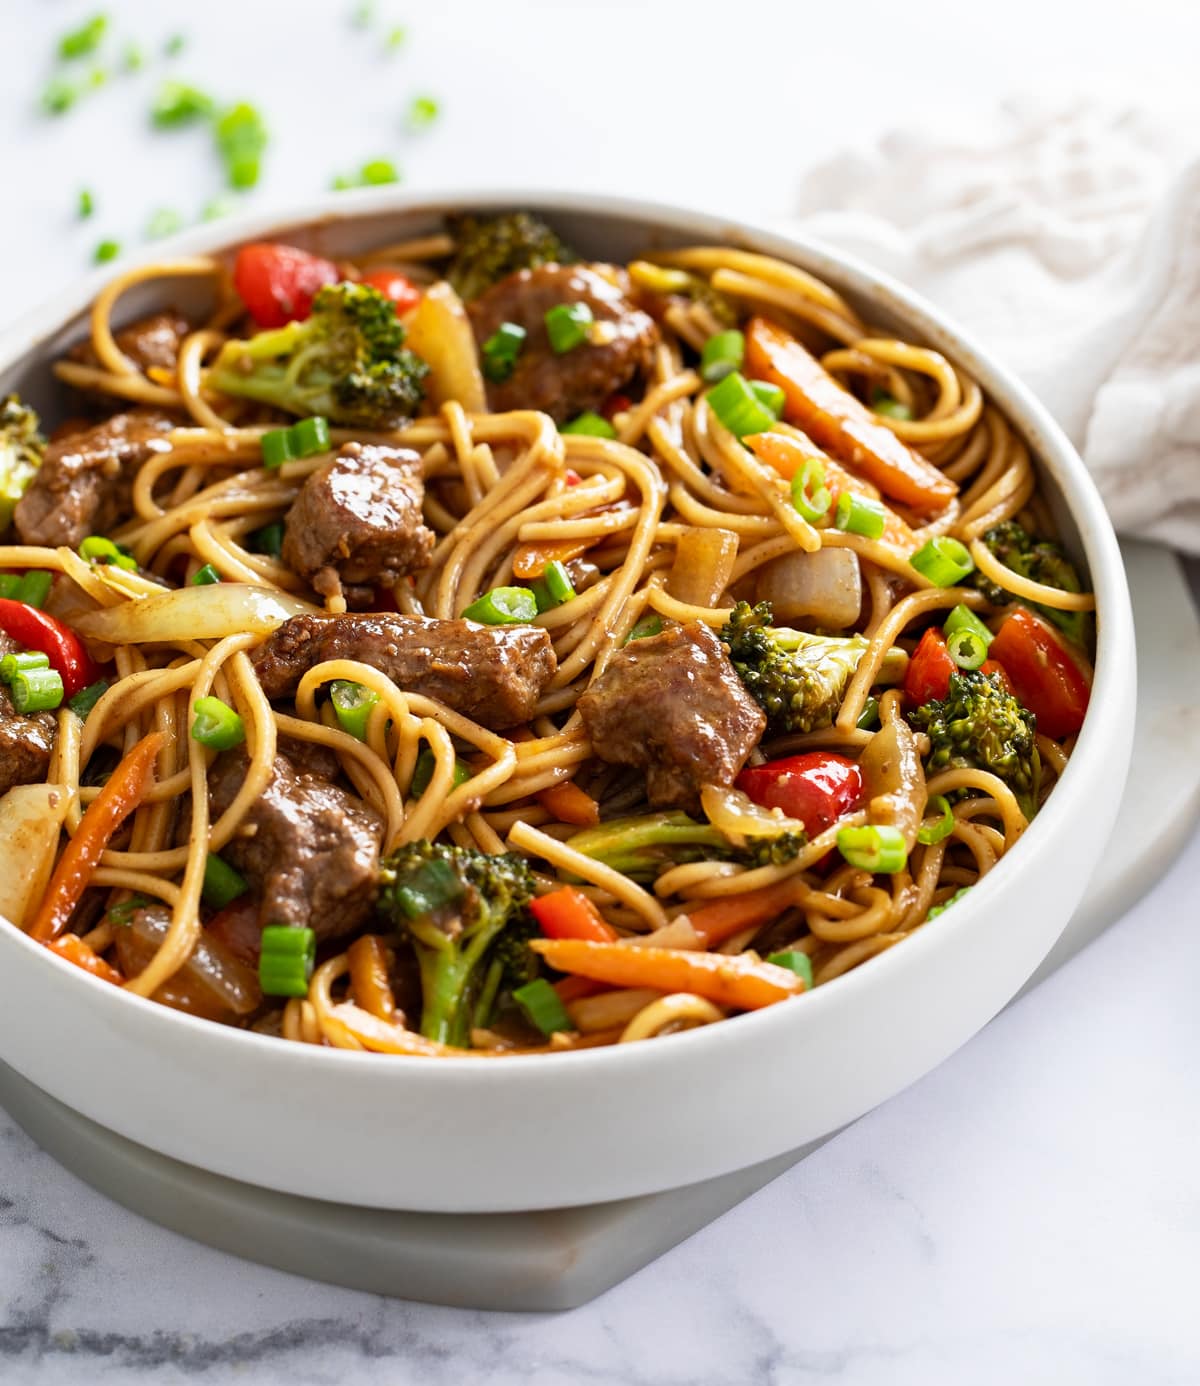 Beef Lo Mein in white bowl with noodles, beef, vegetables, and sauce.